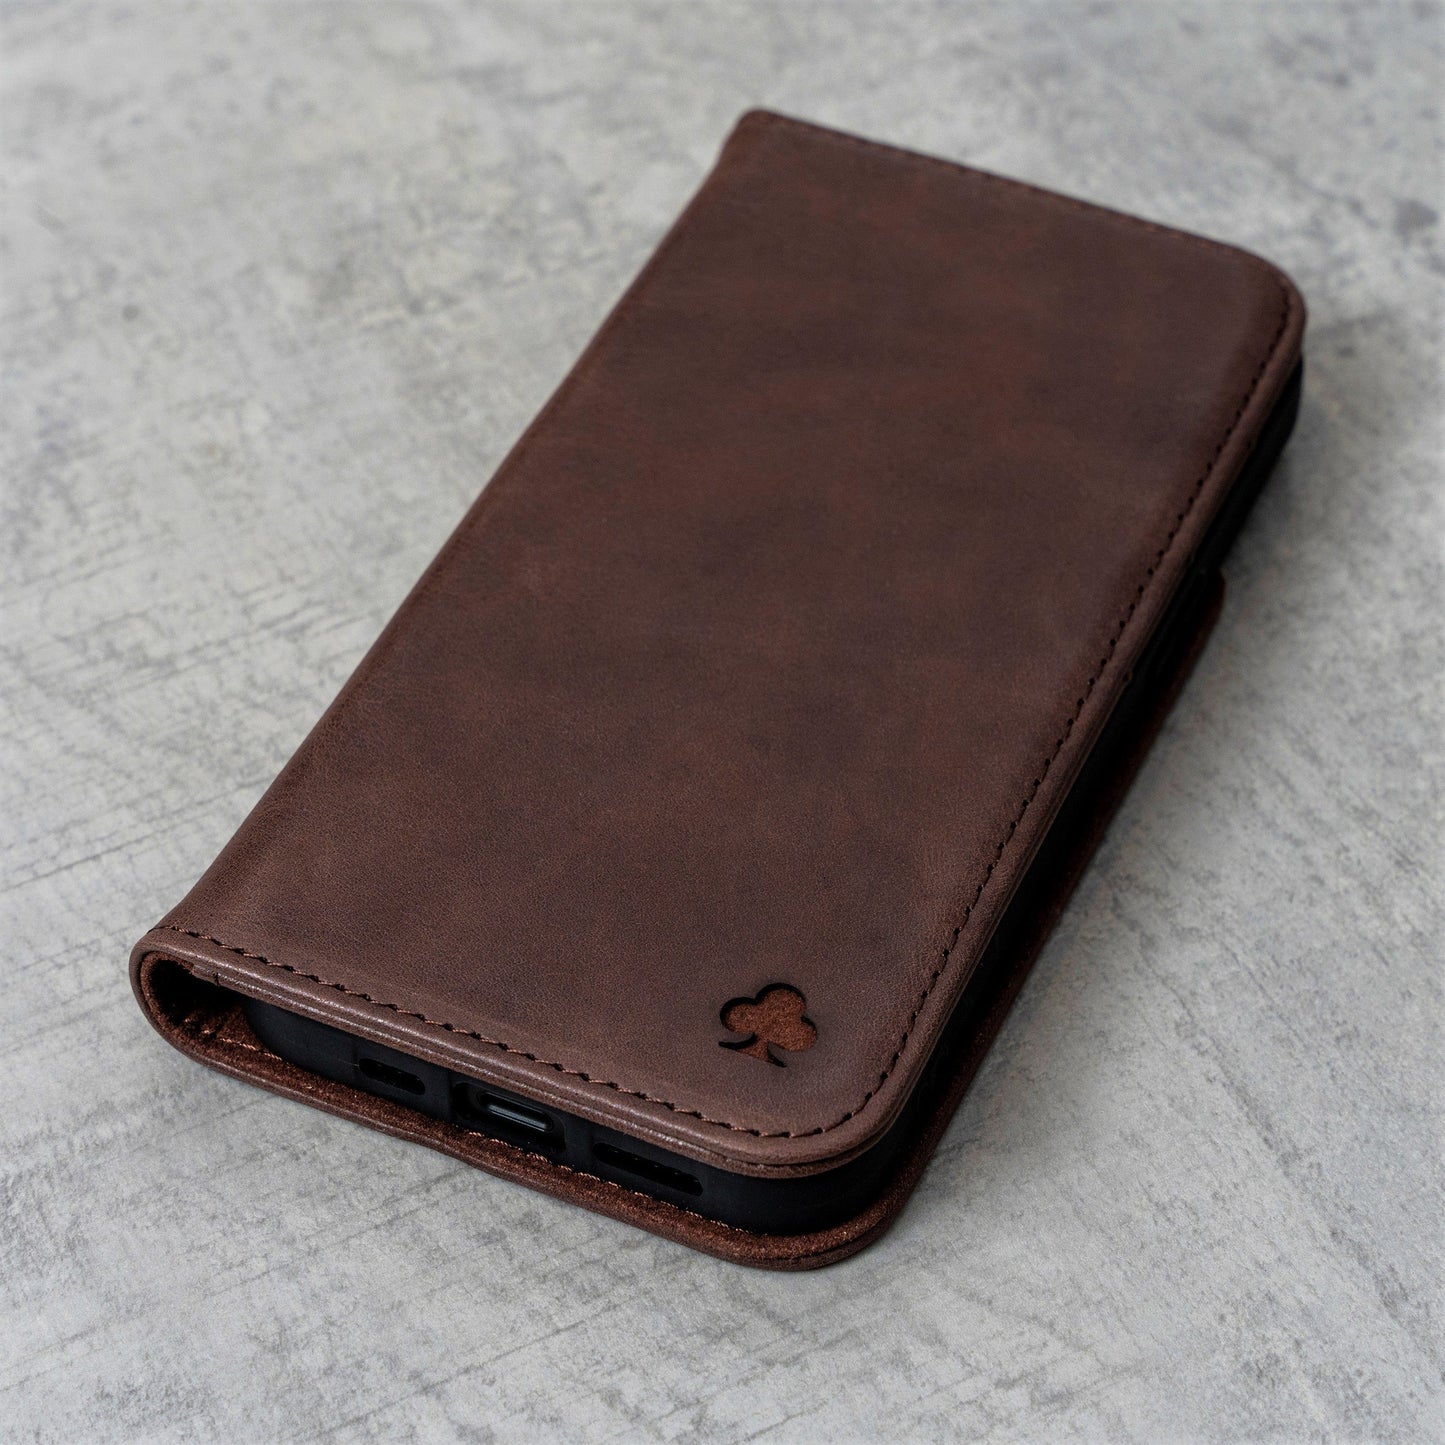 Samsung Galaxy S20 Plus Leather Case. Premium Slim Genuine Leather Stand Case/Cover/Wallet (Chocolate Brown)